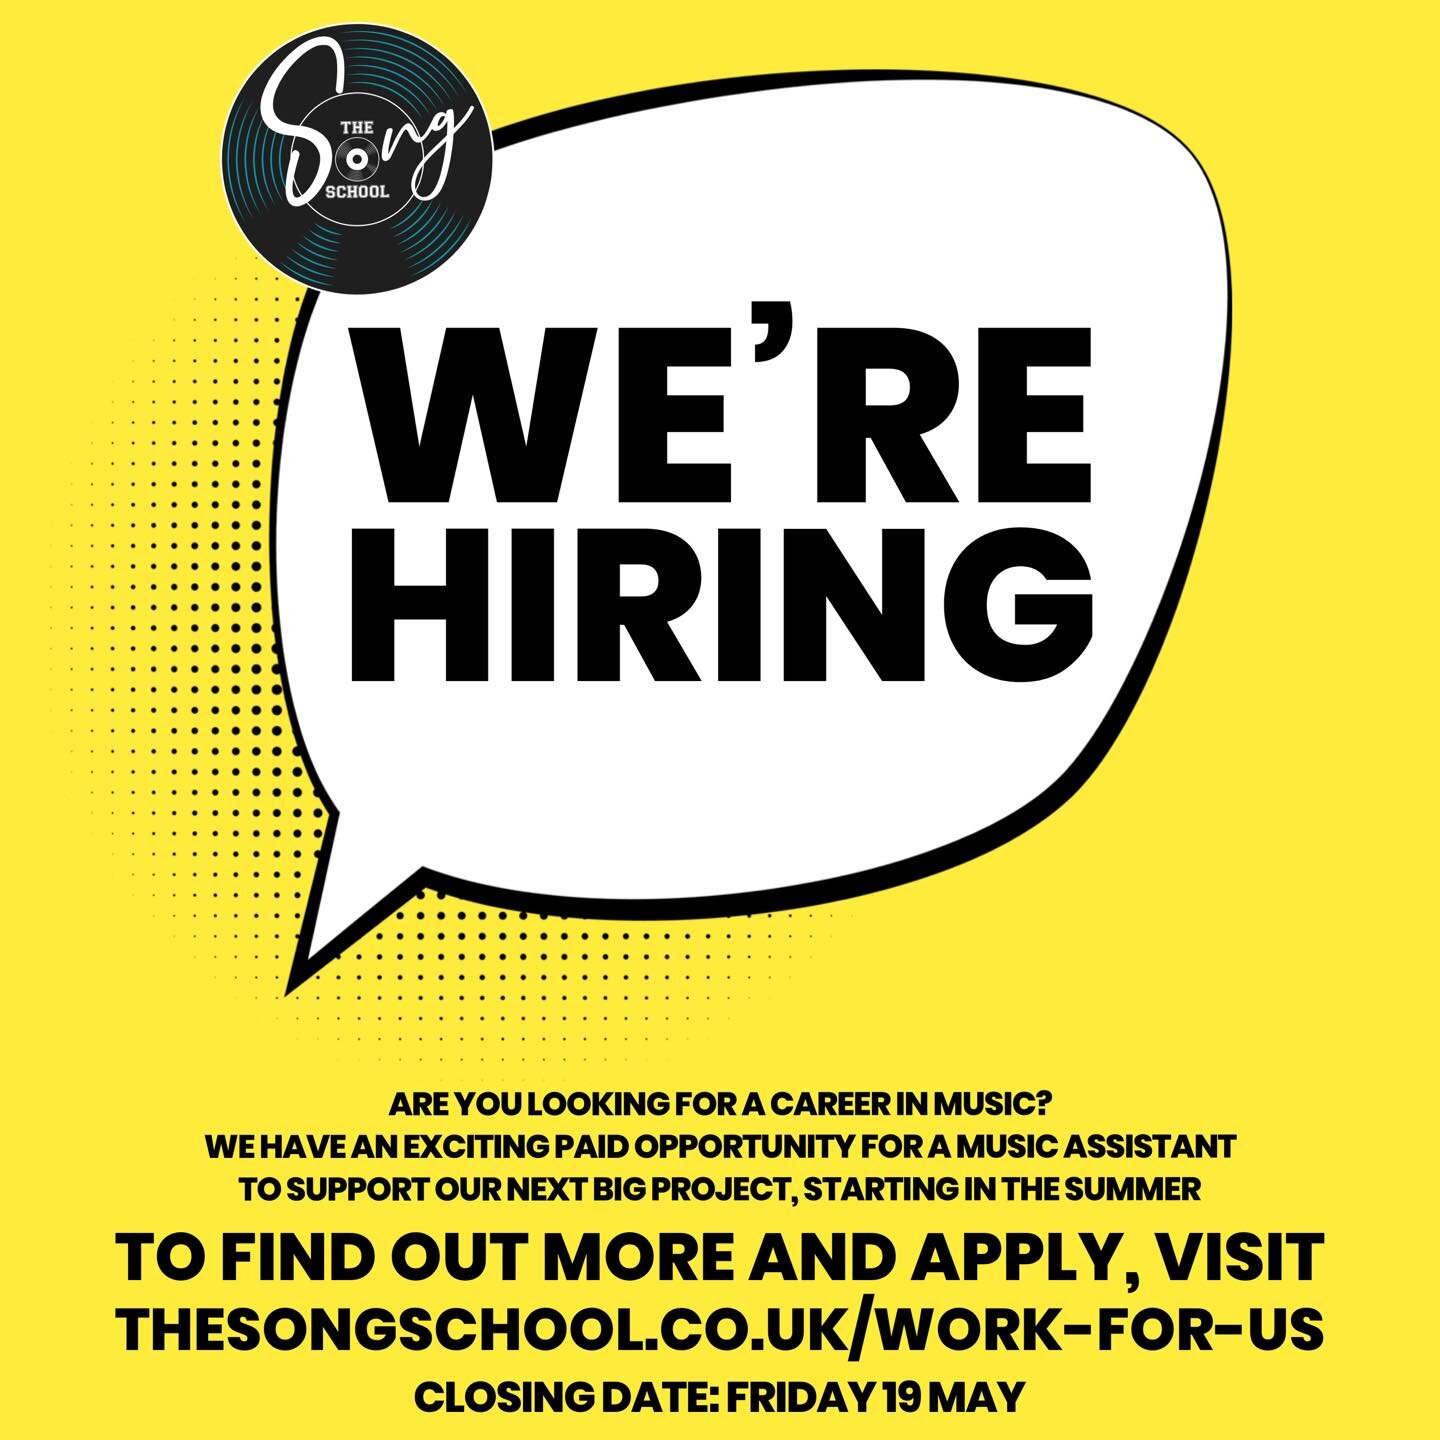 📣 WE&rsquo;RE HIRING

Want to join the team for our next big project? We&rsquo;re on the lookout for a Music Assistant to work with us on the team for The 2023 Hands Together Project, starting this summer. 

The project is a collaboration between Th